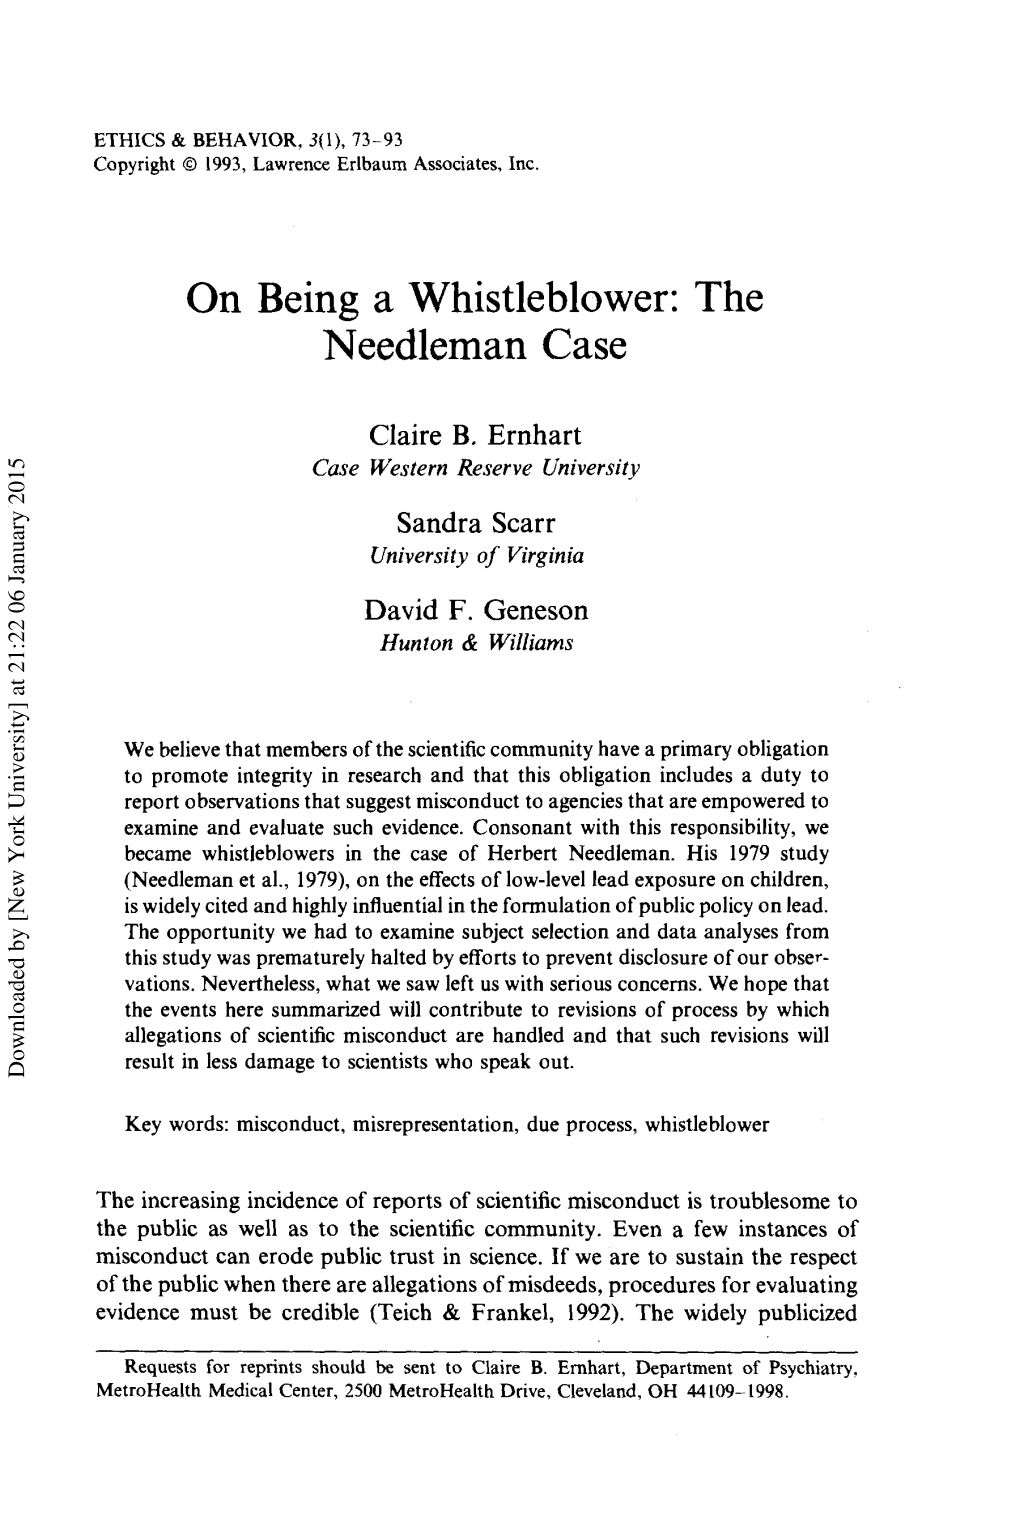 On Being a Whistleblower: the Needleman Case